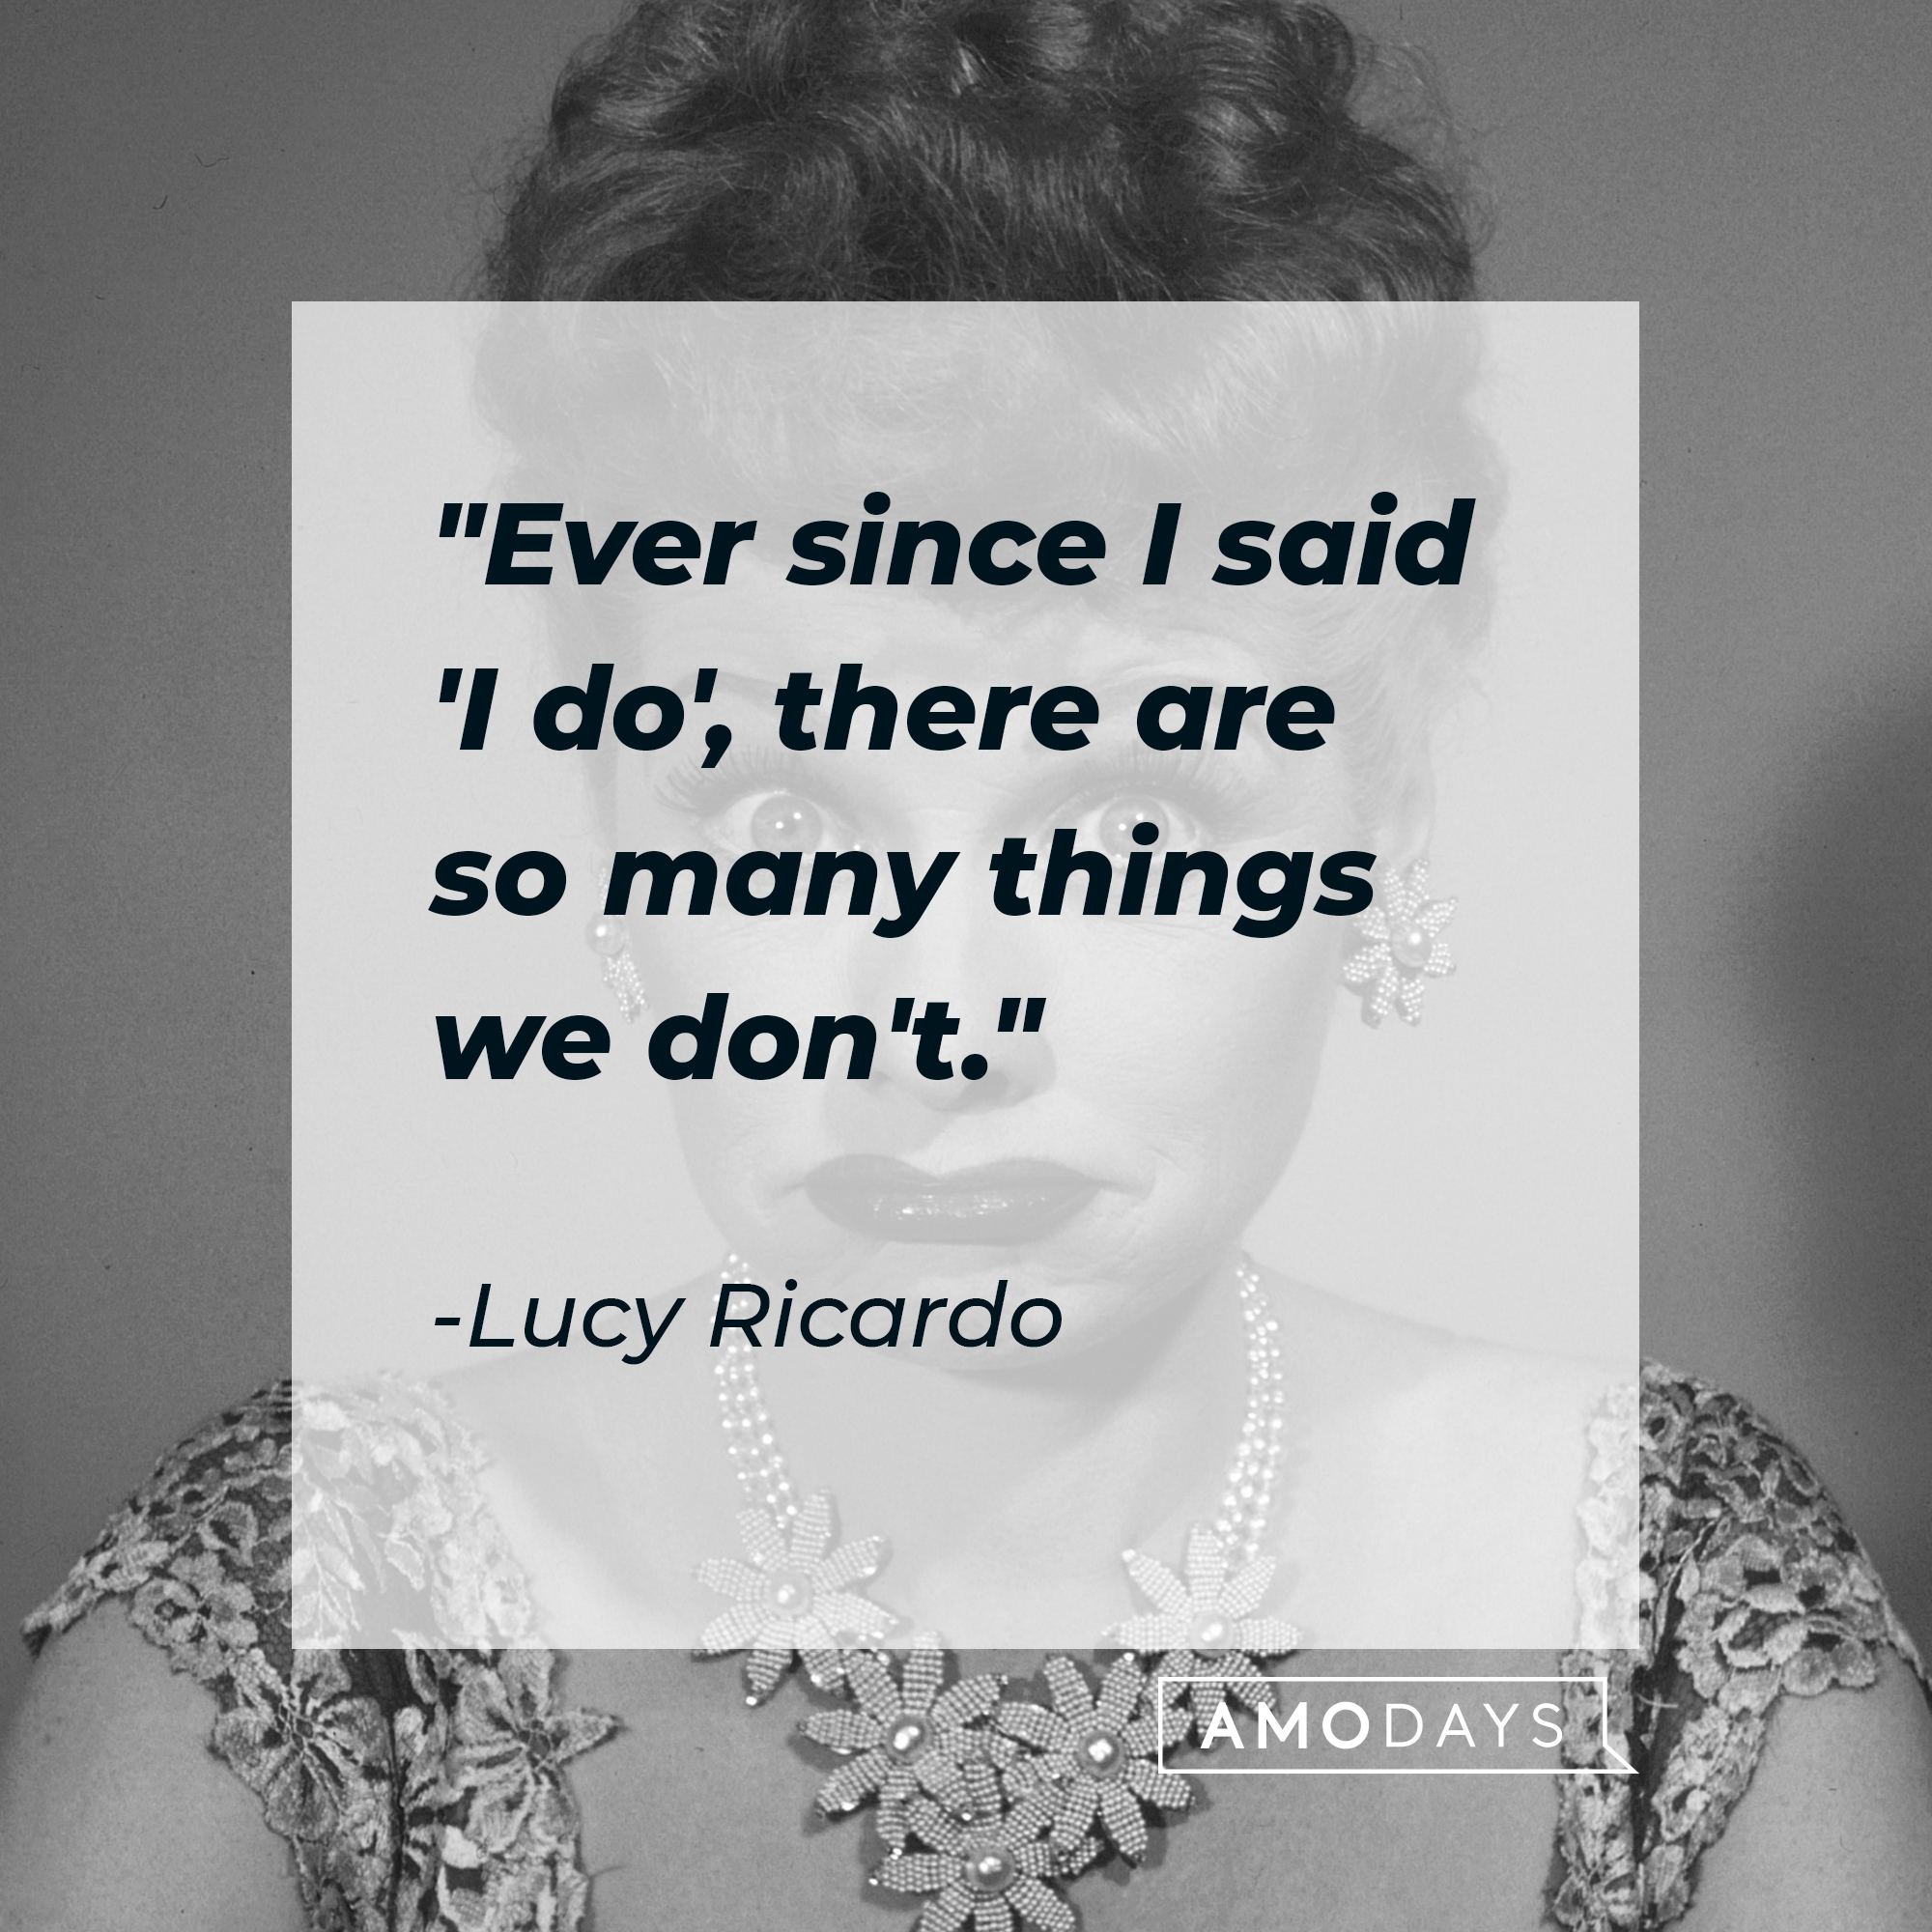 Lucy Ricardo's quote: "Ever since I said 'I do', there are so many things we don't." | Source: Getty Images